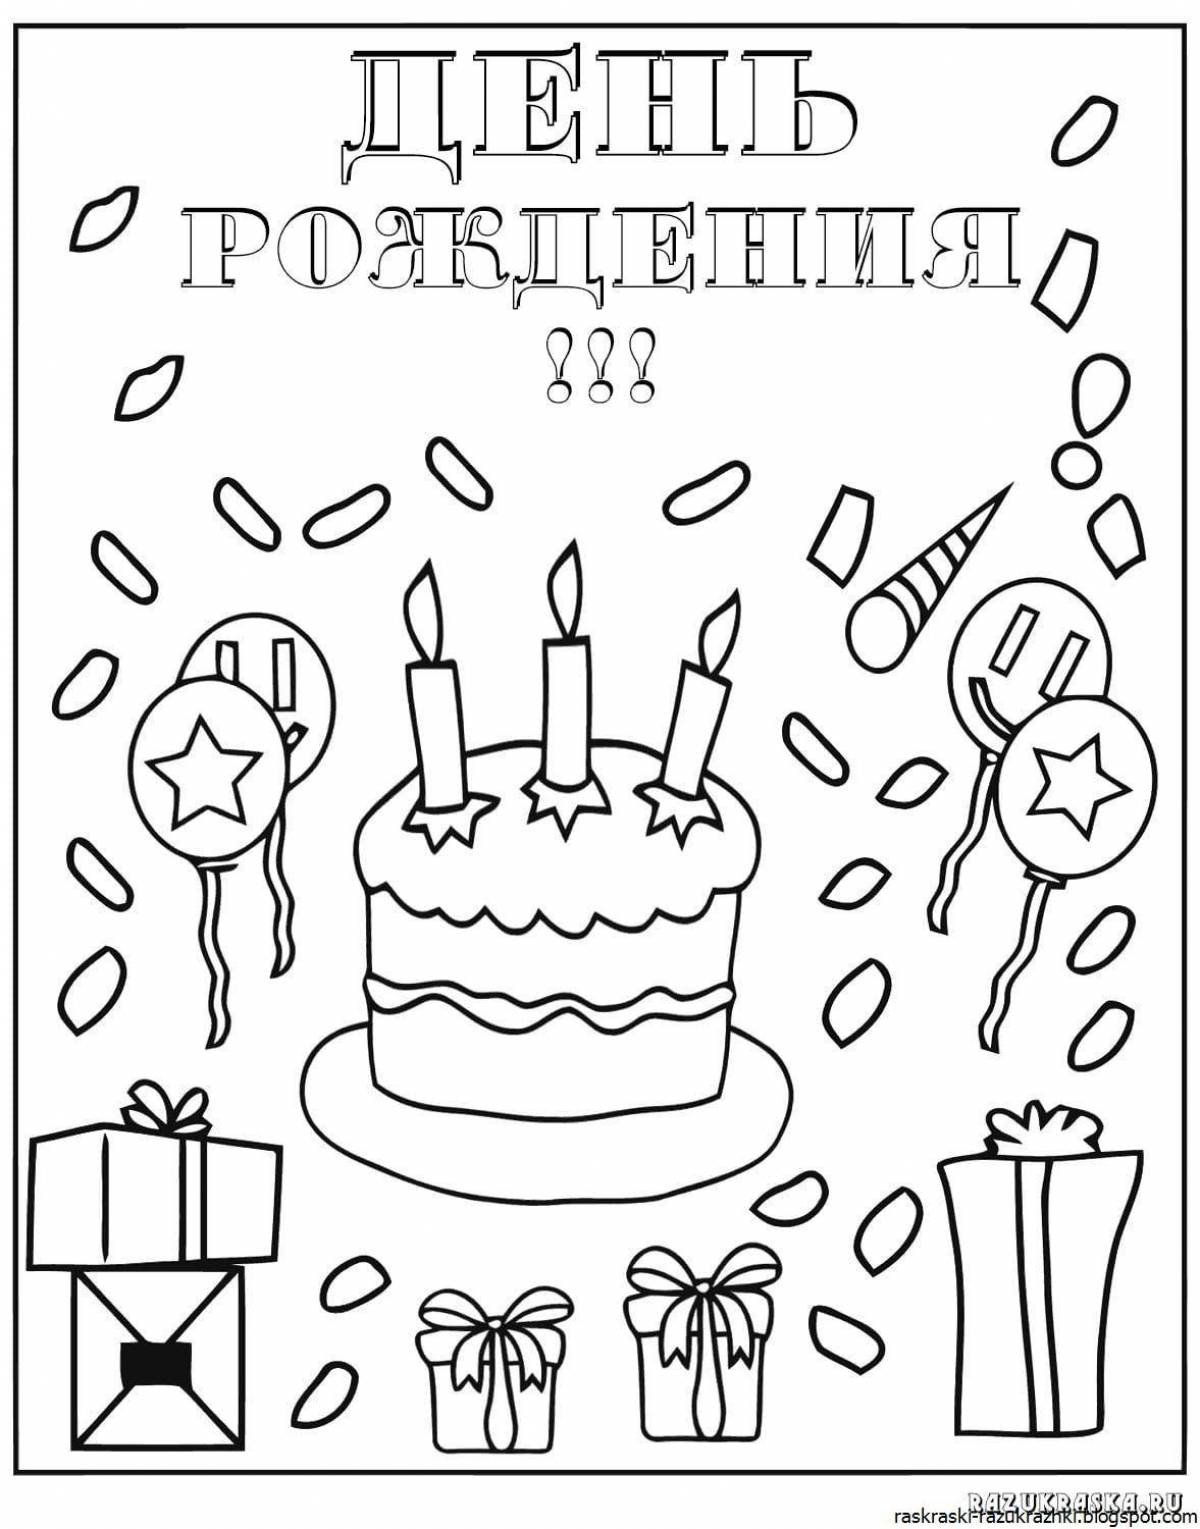 Playful dad happy birthday coloring page